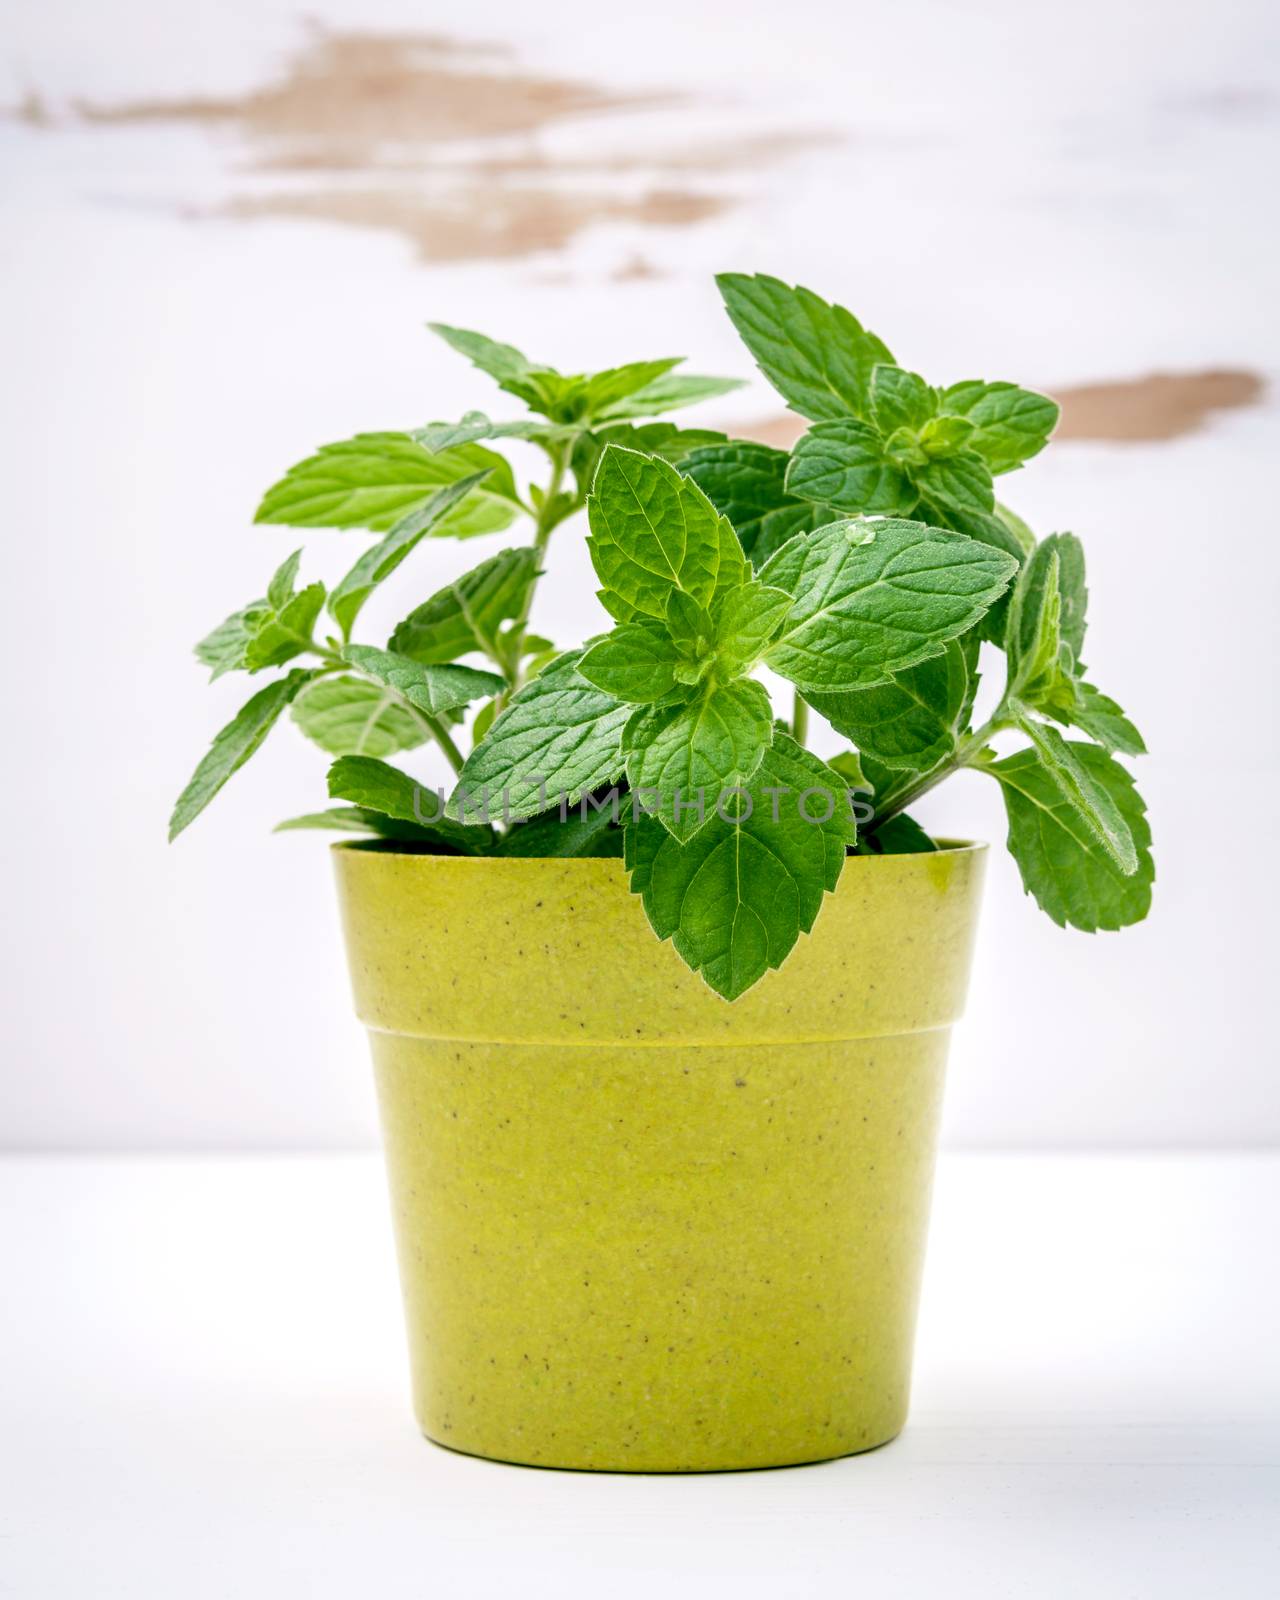 Fresh peppermint potted on white shabby wooden background. Peppermint  planted in pots.